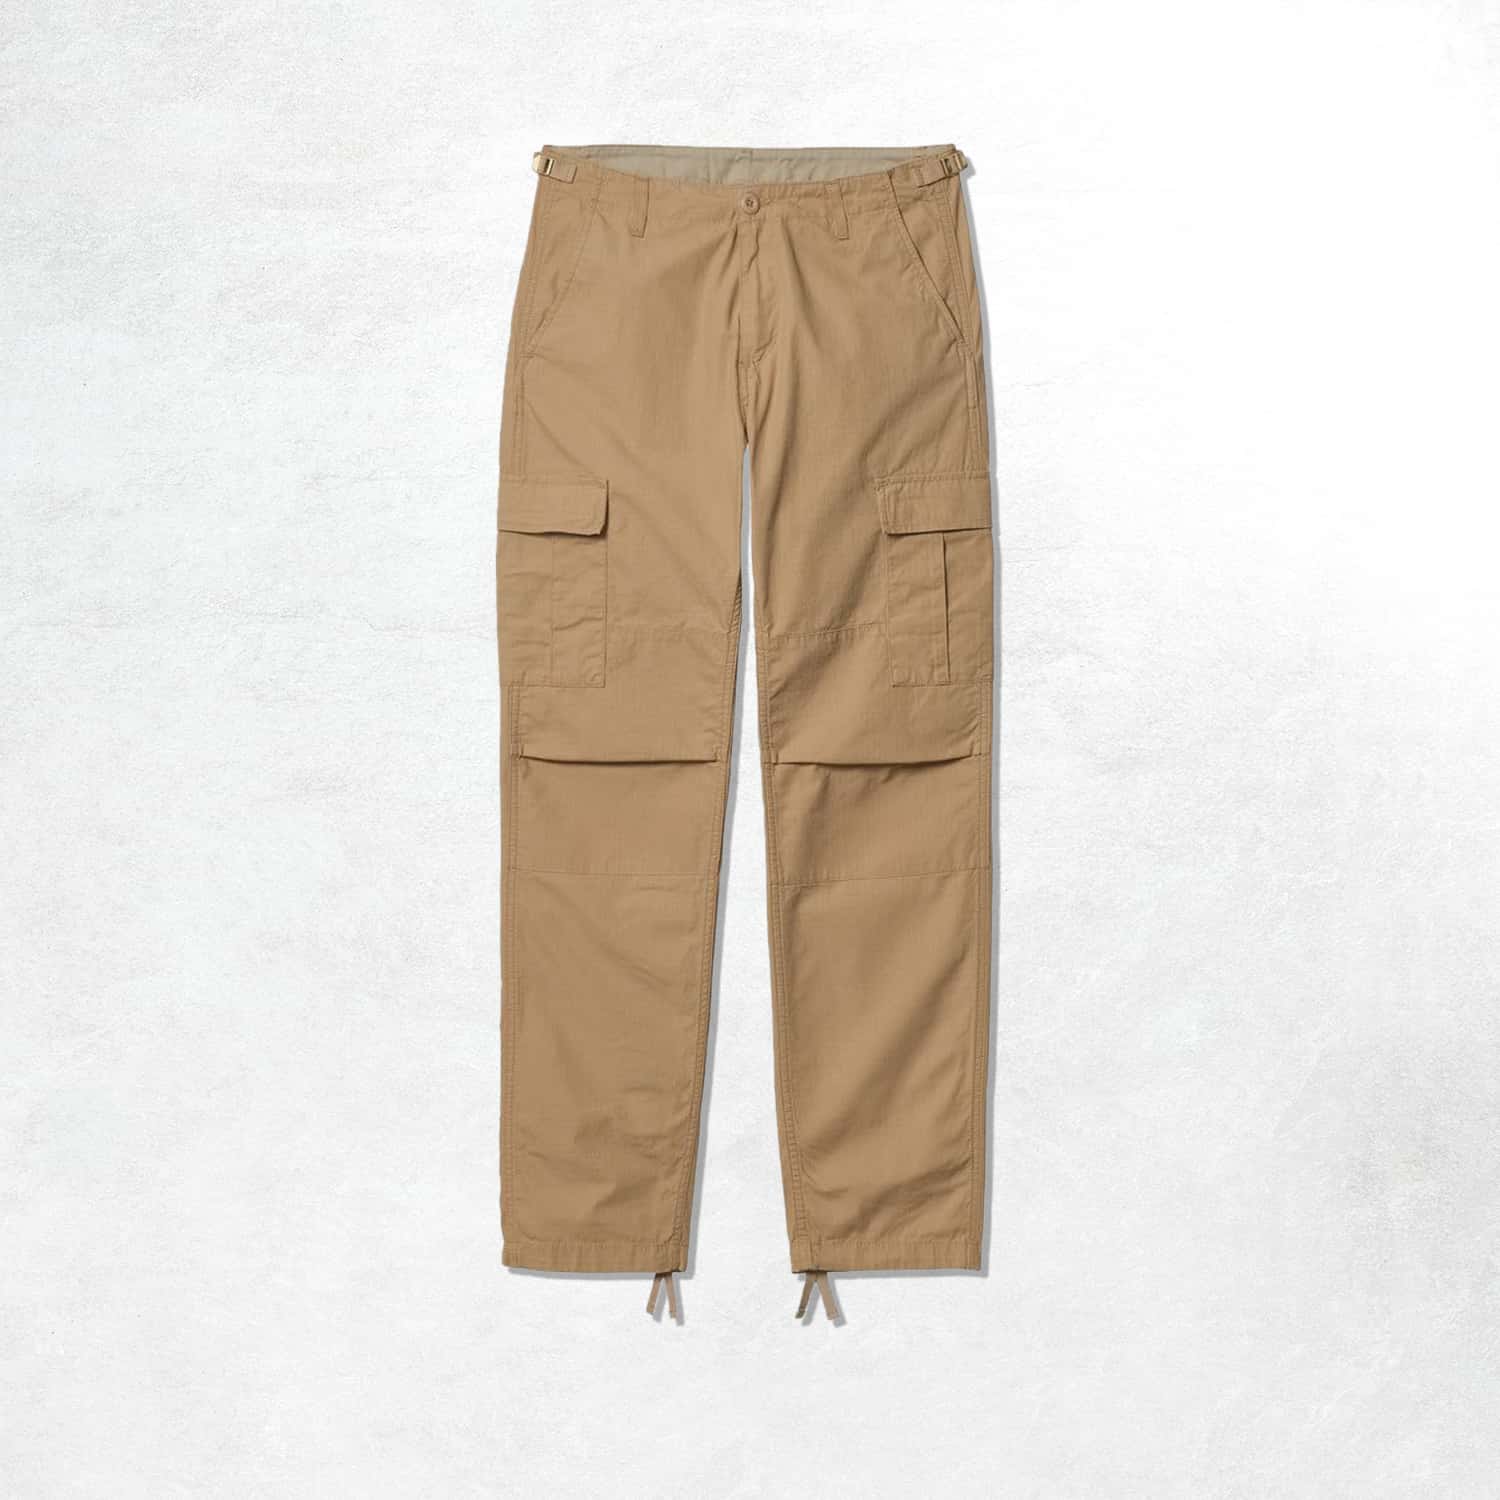 Carhartt WIP Aviation Pant: Dusty H Brown (Front)